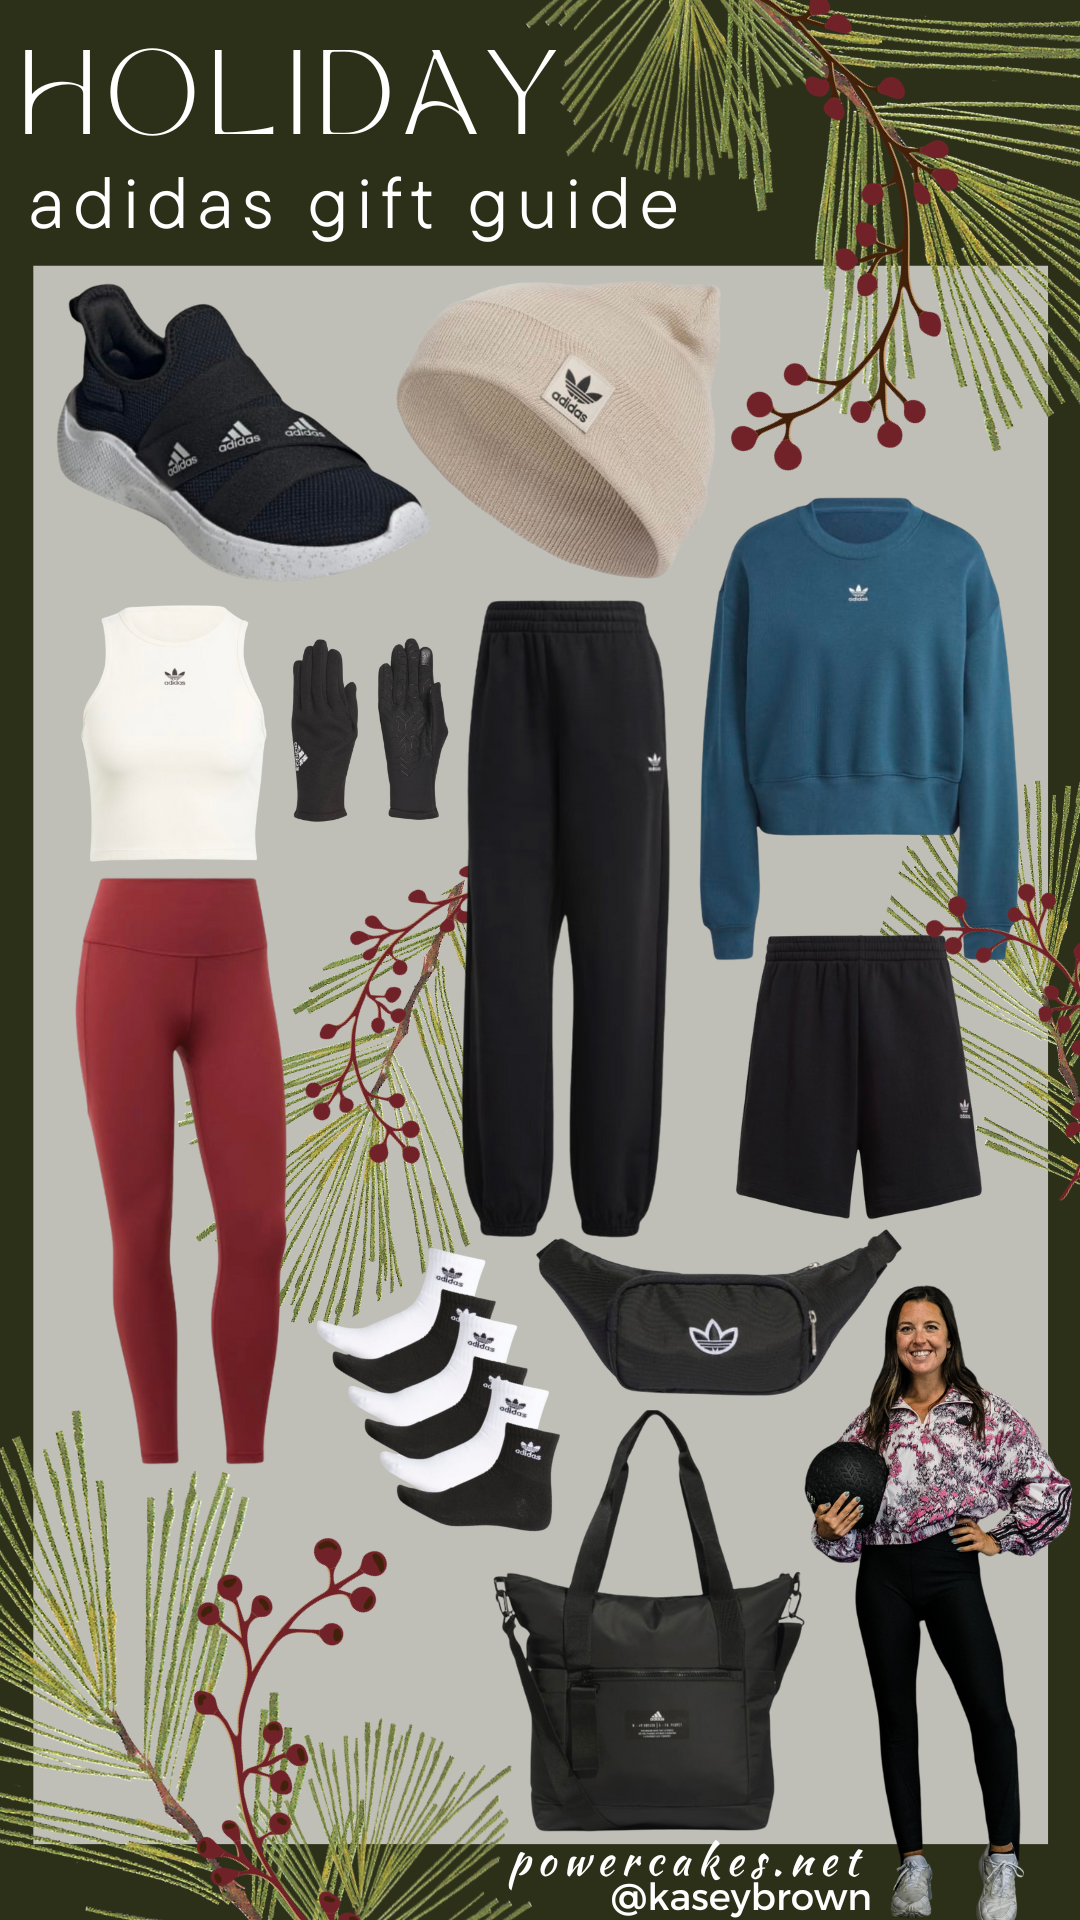 adidas Holiday Gift Guide: Women's Essentials